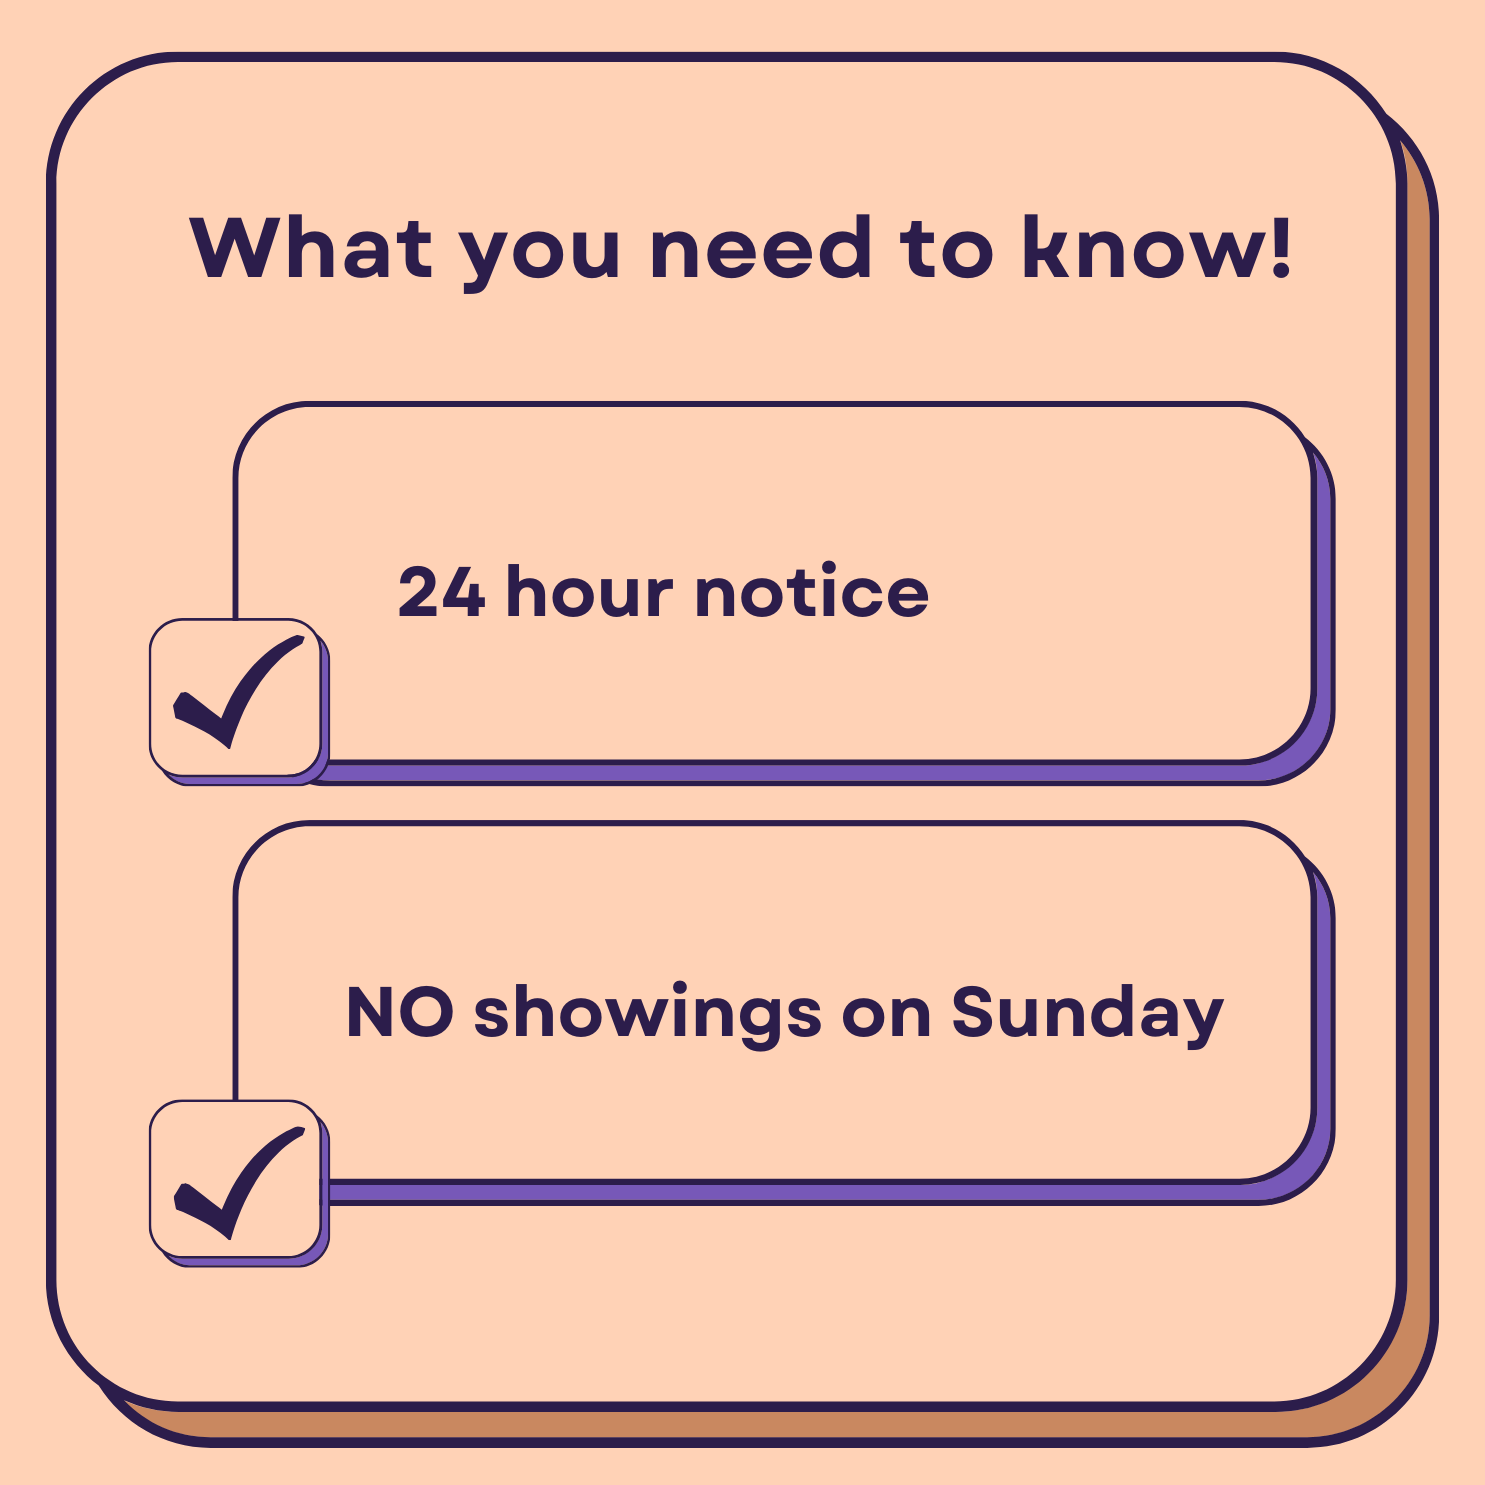 Infographic on how to sell a home with a renter in Saskatchewan, highlighting the requirement to provide a 24-hour notice for showings and no showings on Sundays.